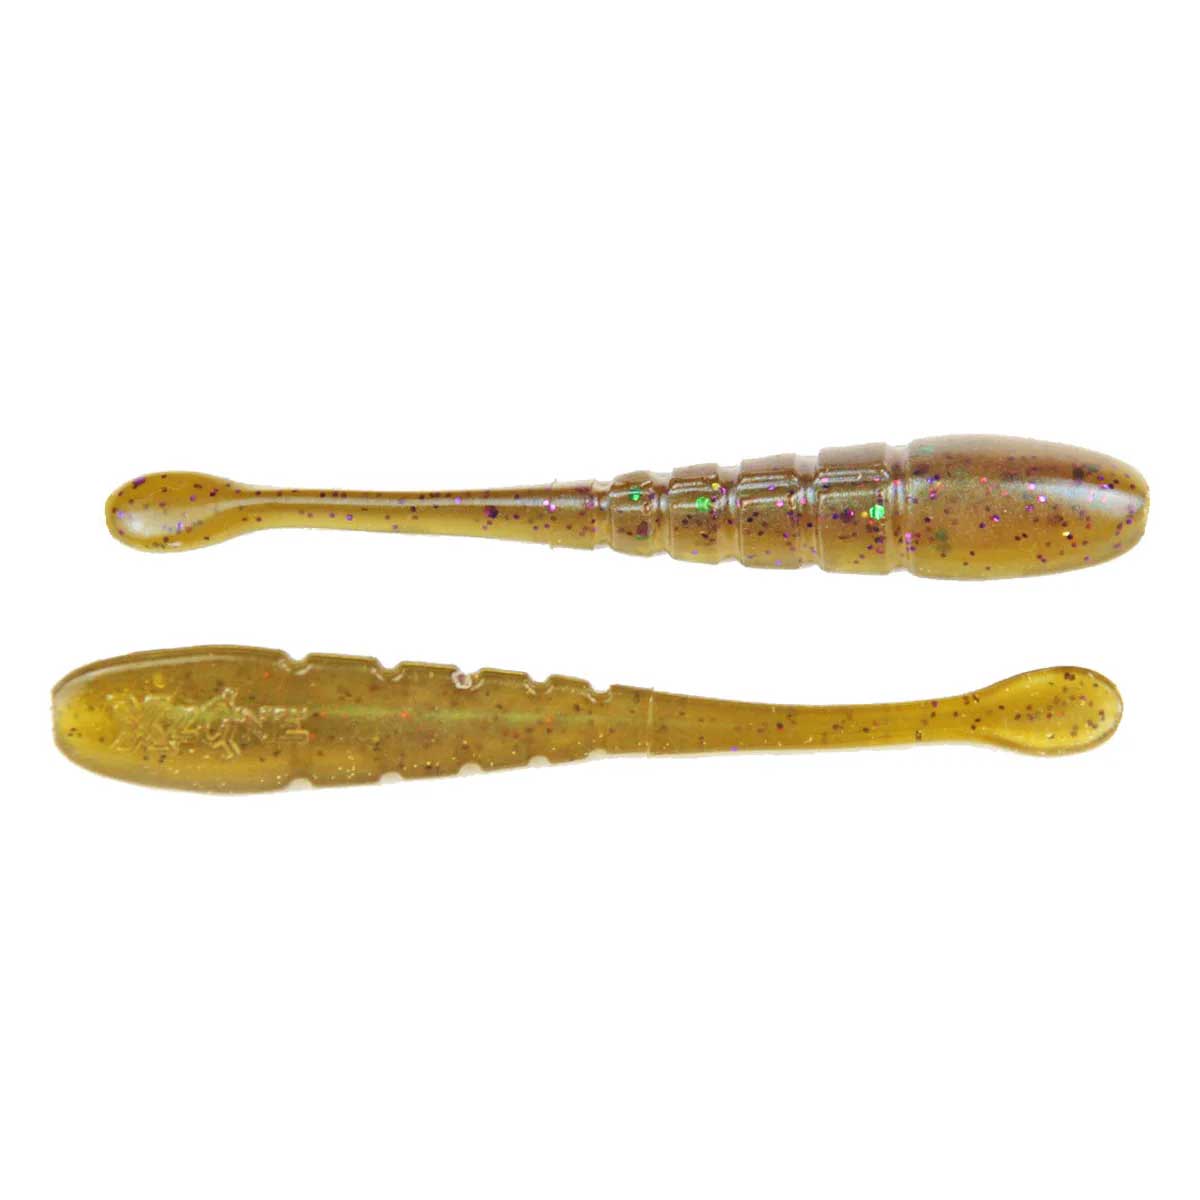 X-Zone Lures Pro Series Finesse SLAMMER: Bluegill; 3 1/4 in.